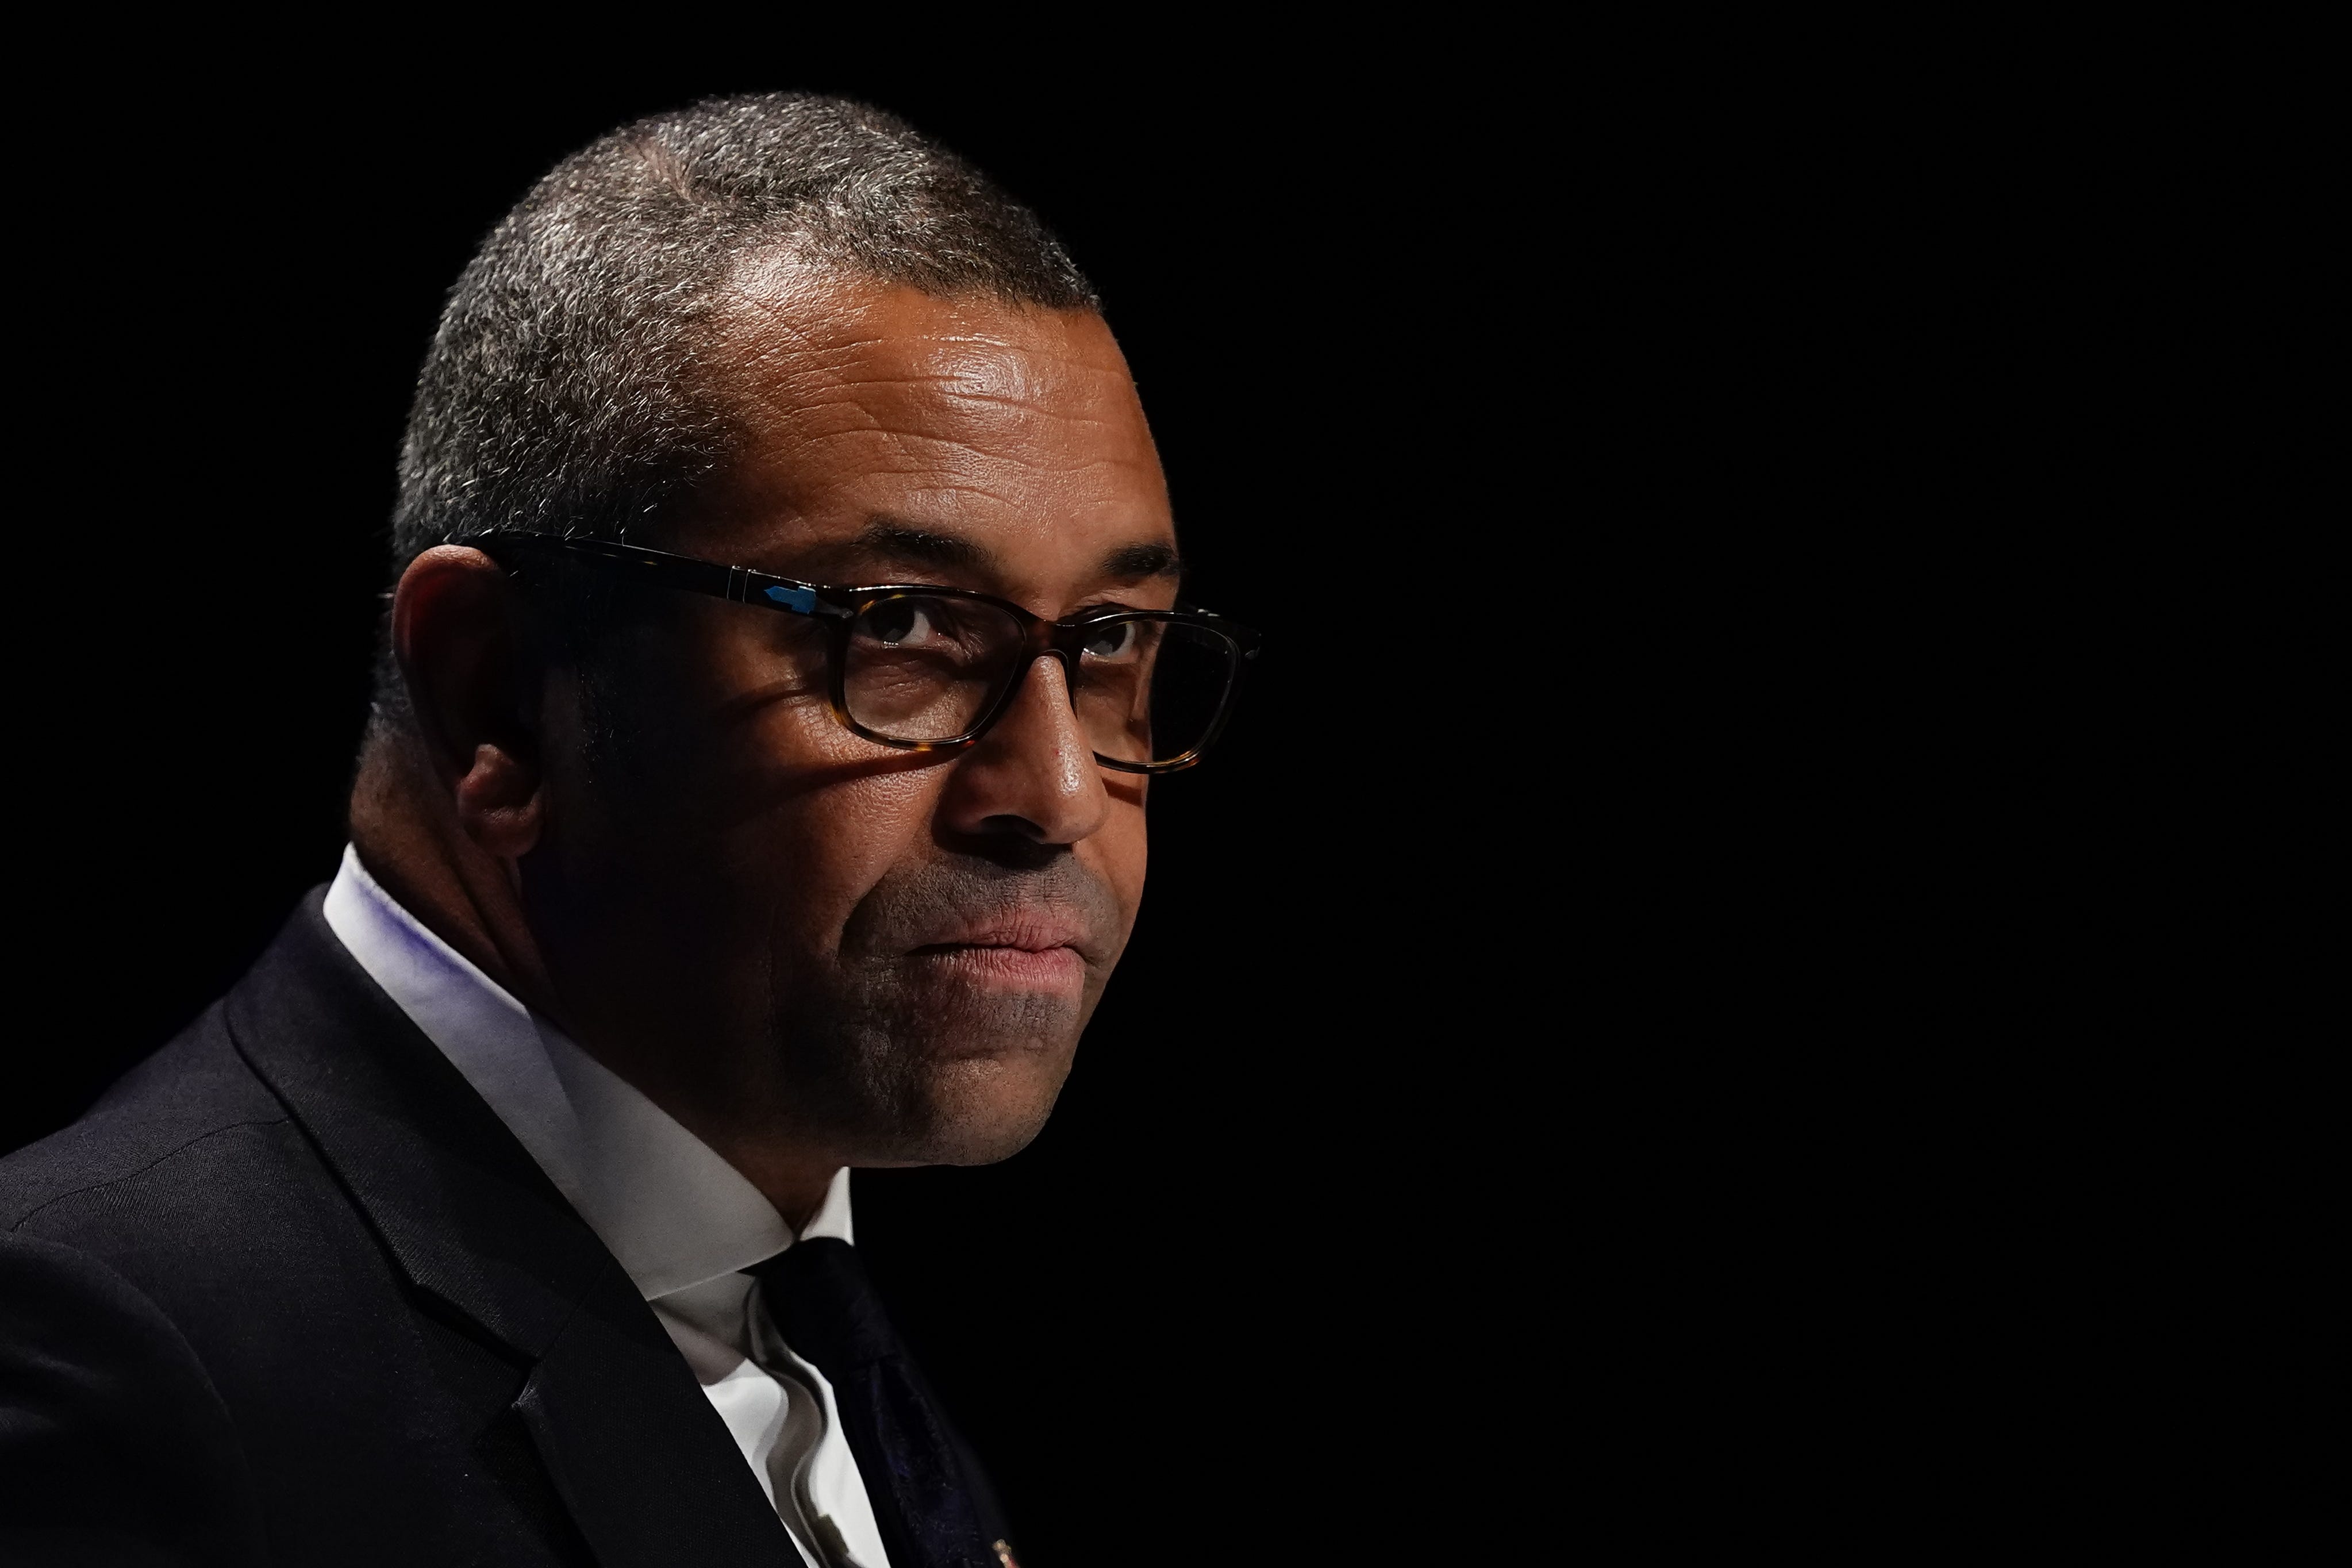 James Cleverly said the Russian accusations were a ‘distraction’ (Aaron Chown/PA)